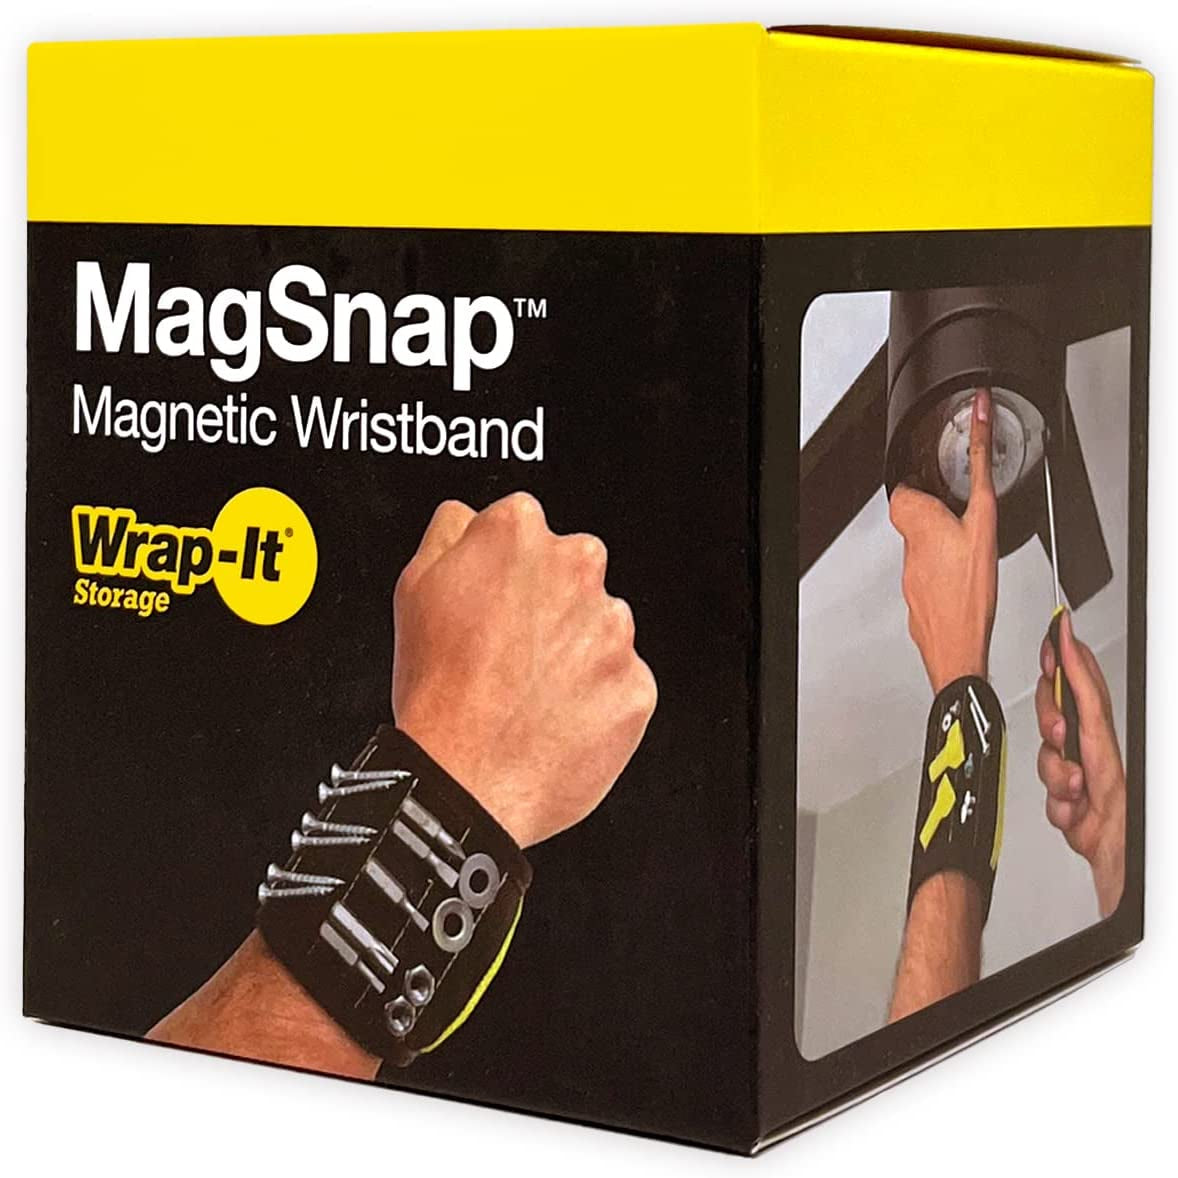 Magsnap Magnetic Wristband by  - Wrist Magnet Tool and Screw Holder - Tool Gifts for Men and Women Who Are Handy